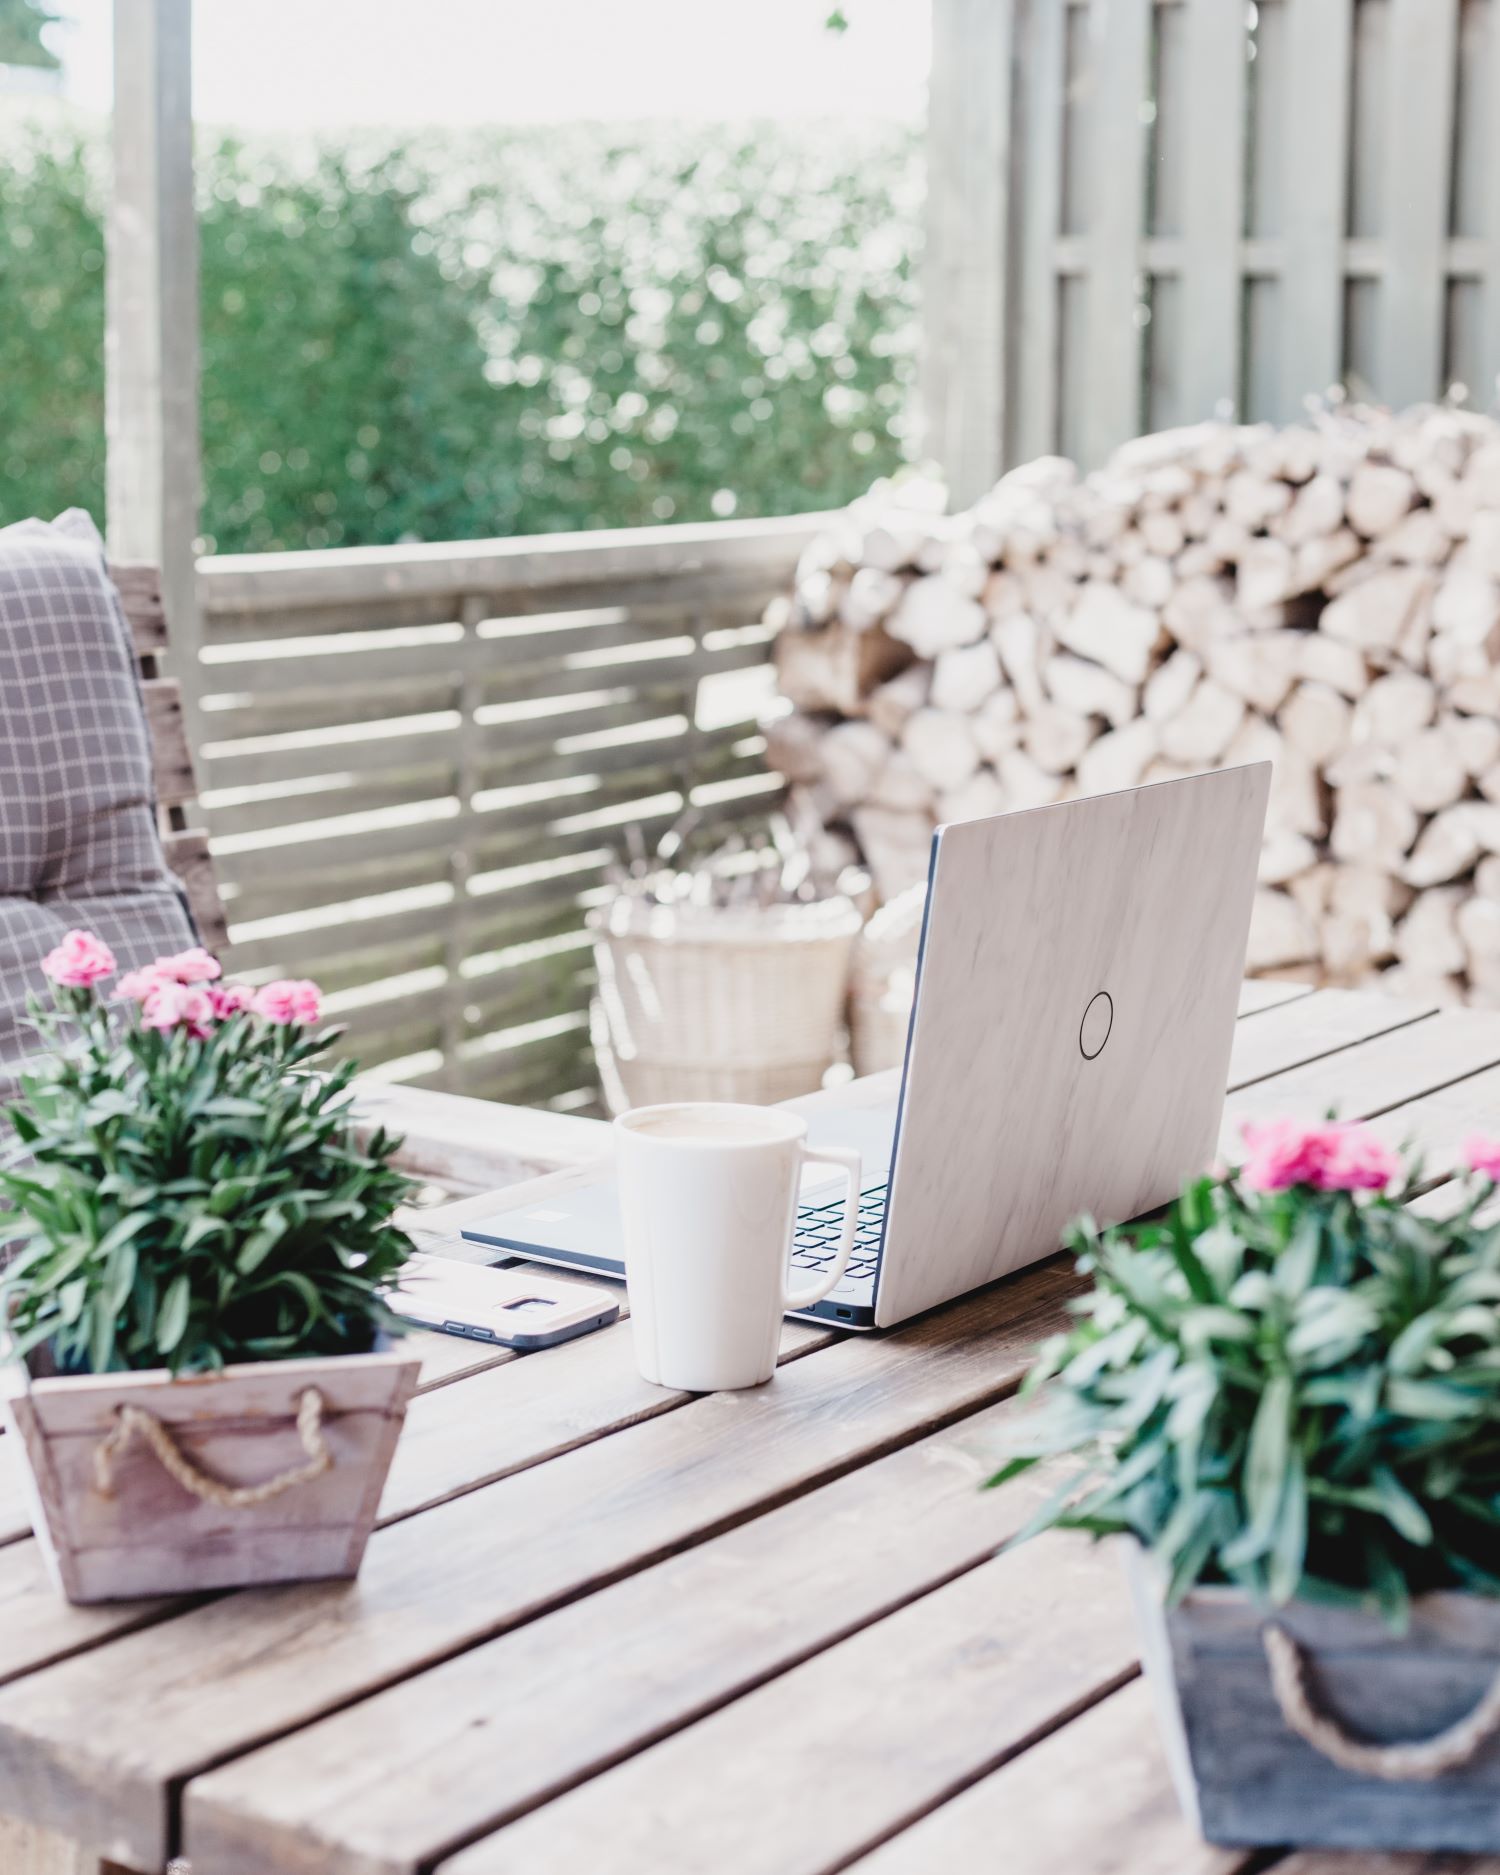 Copywriting support represented by a white table with an open laptop, two flower pots and a cup. A window in the background showing flowers